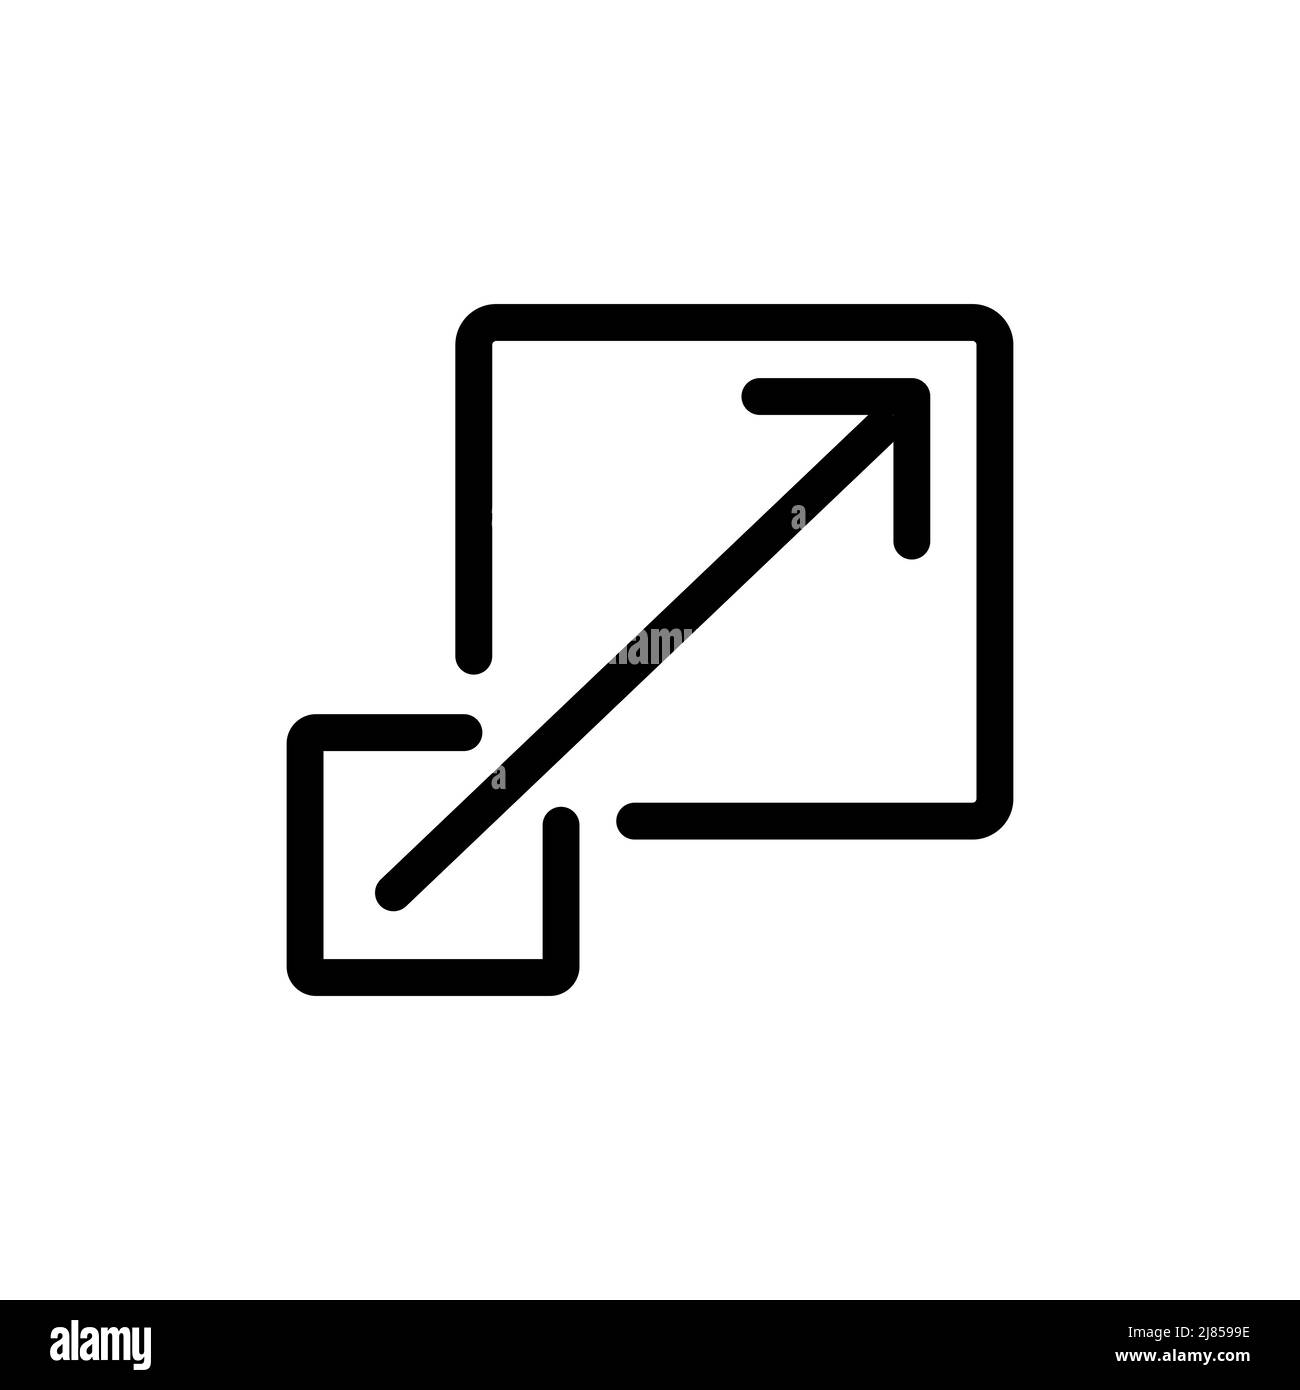 Scalability icon. Scalable illustration symbol. Sign scale enlarge vector. Stock Vector